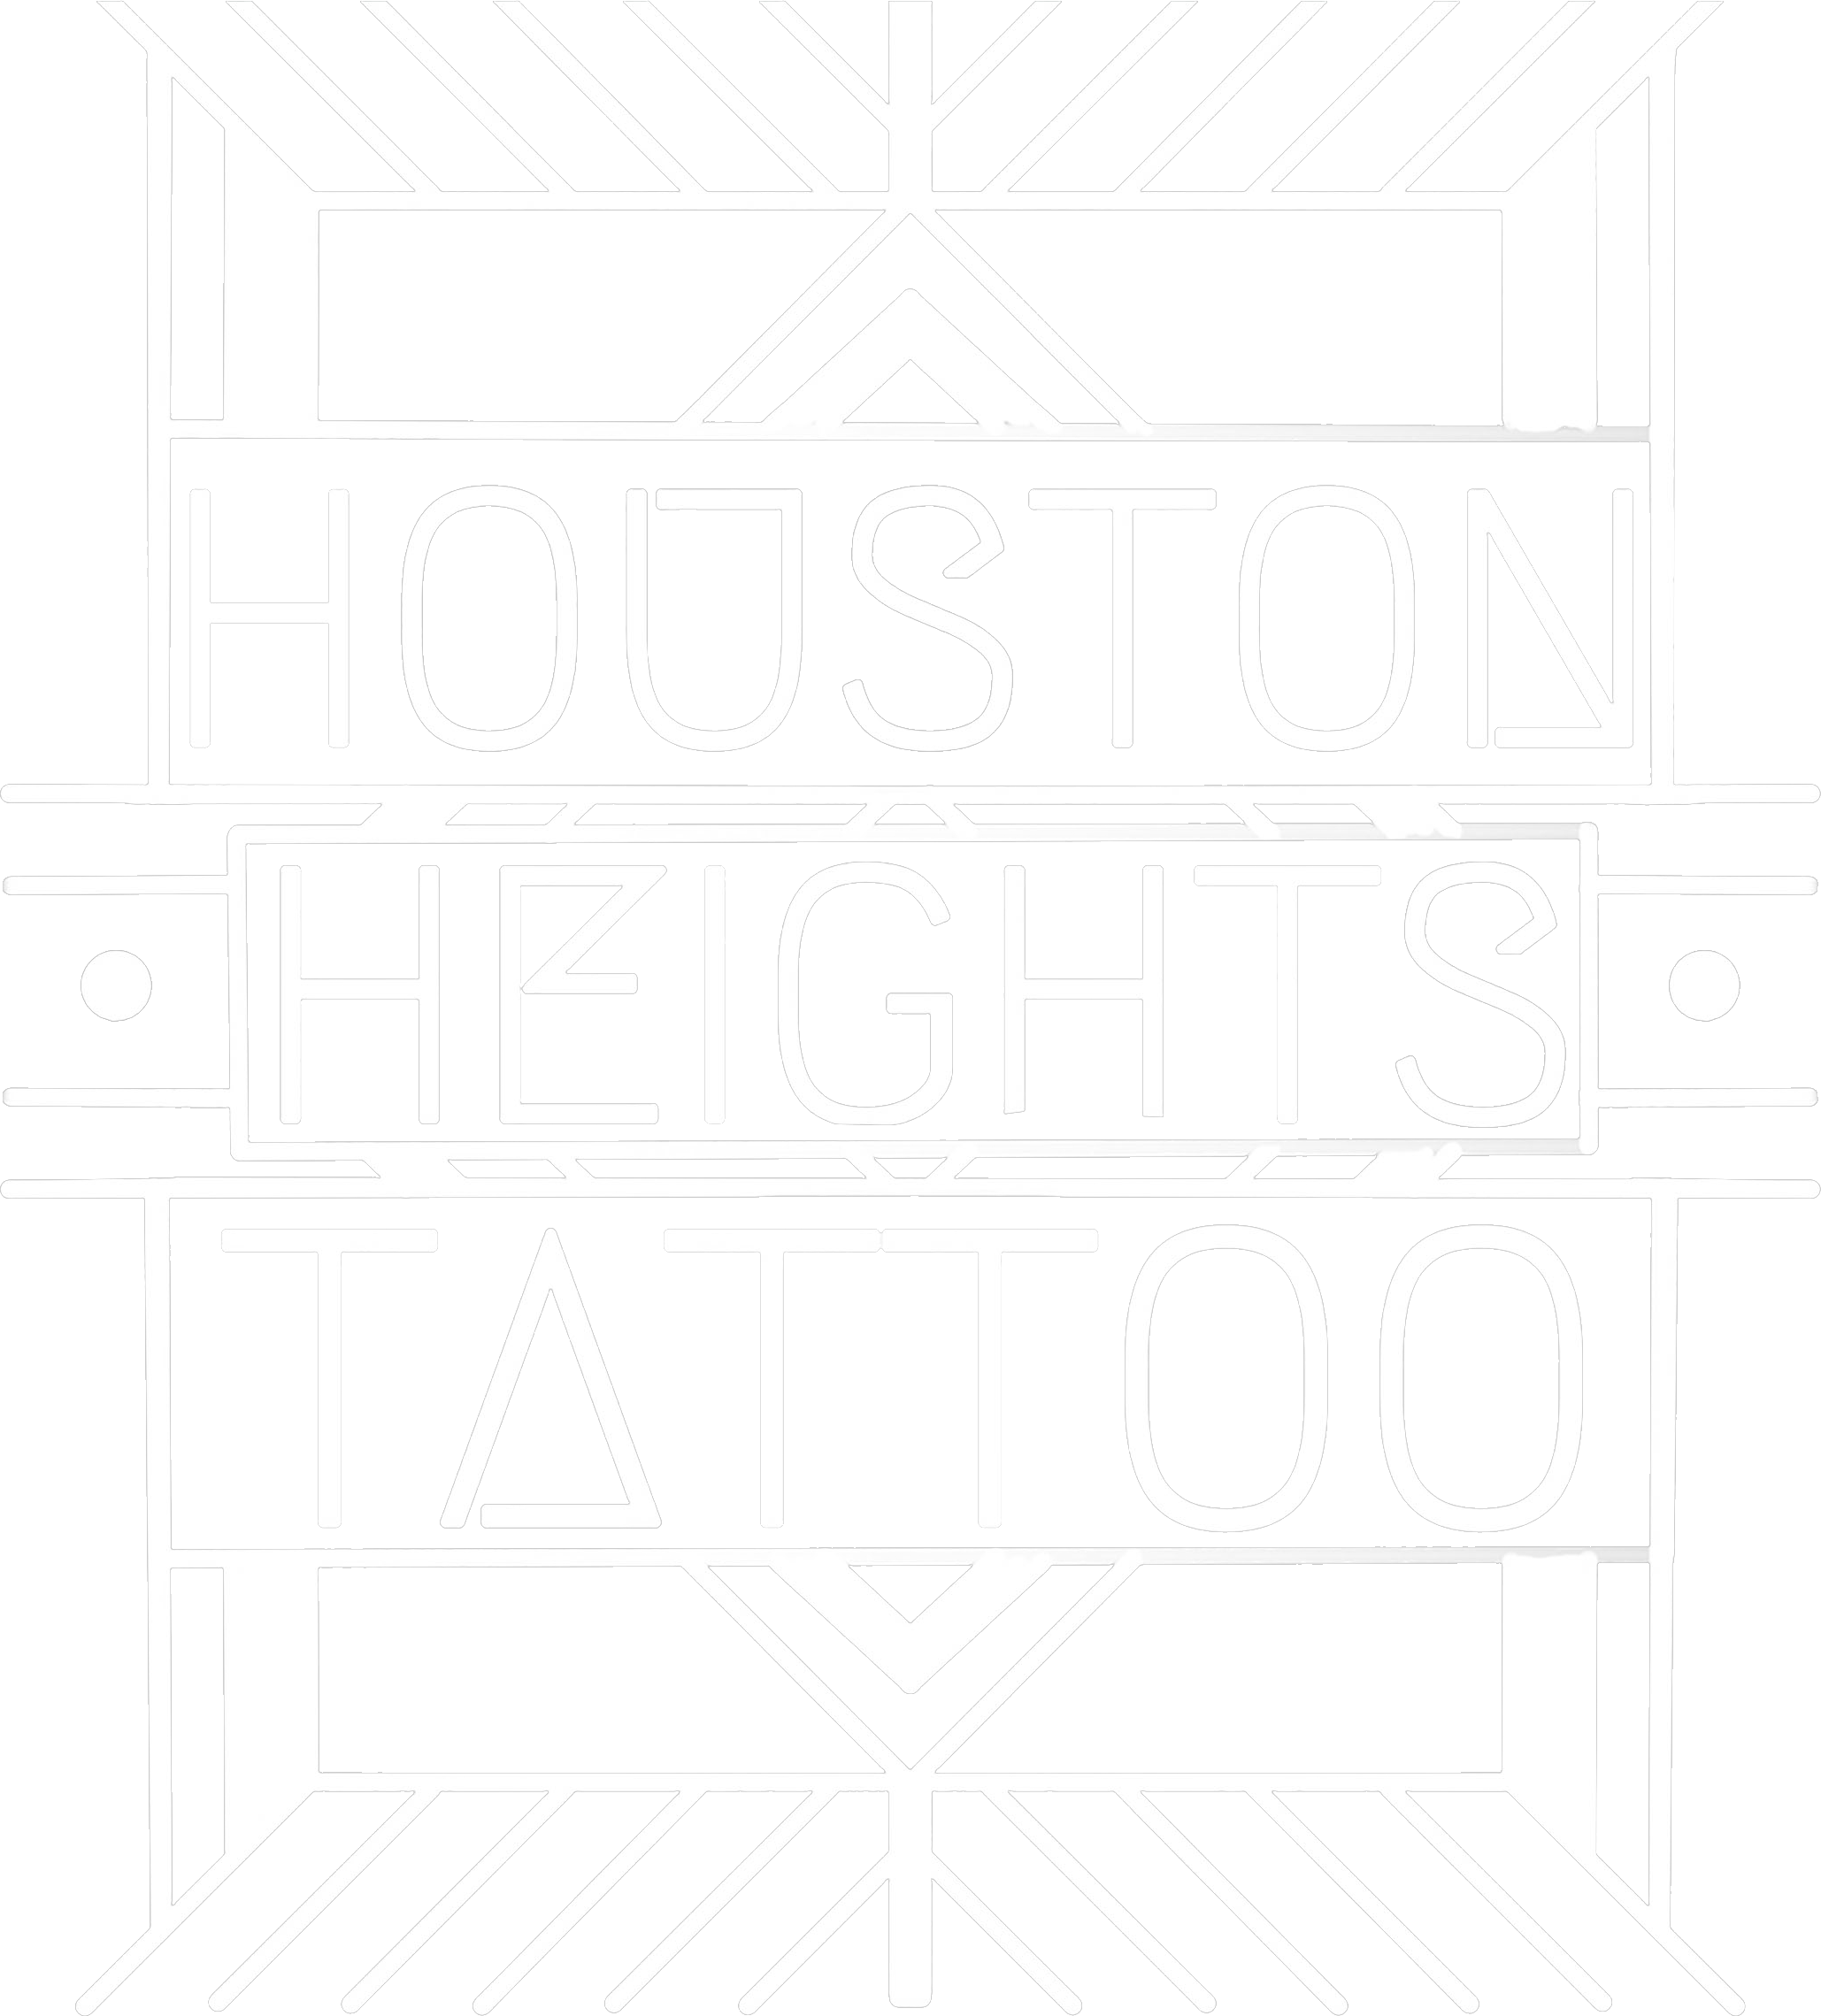 HOUSTON HEIGHTS TATTOO  255 Photos  58 Reviews  101 W 14th St Houston  Texas  Tattoo  Phone Number  Yelp